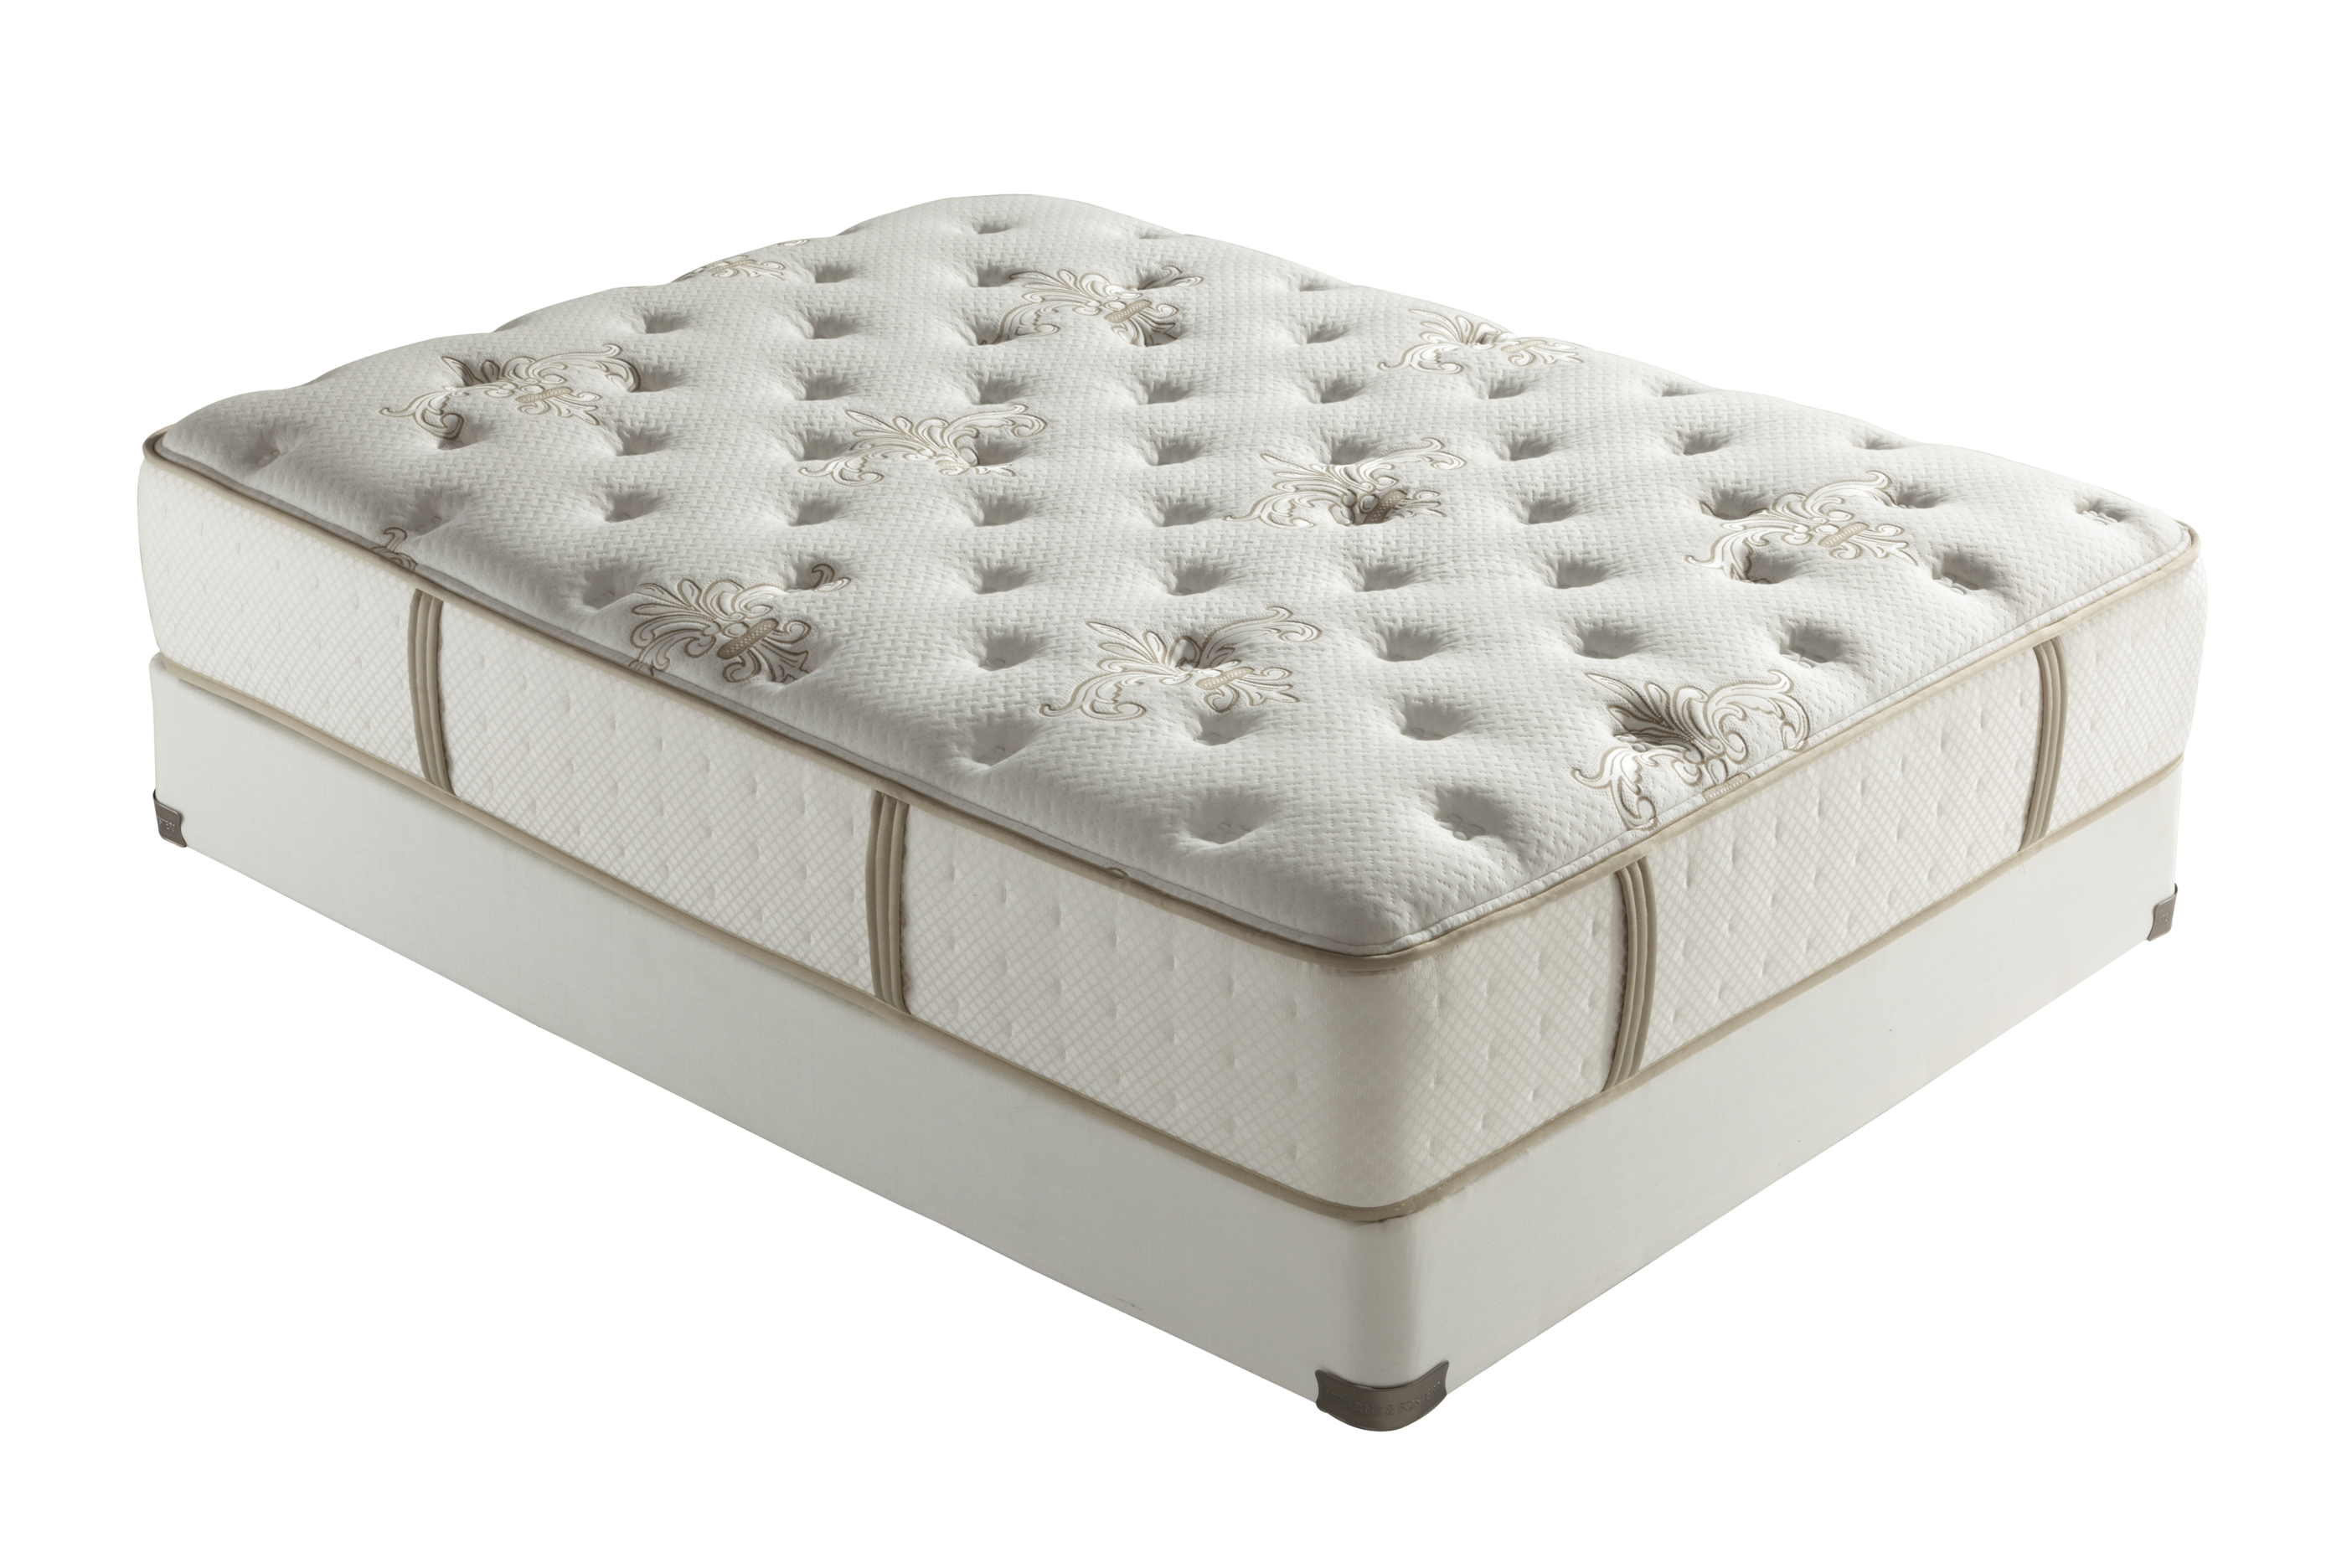 price stearns and foster sienna king size mattress